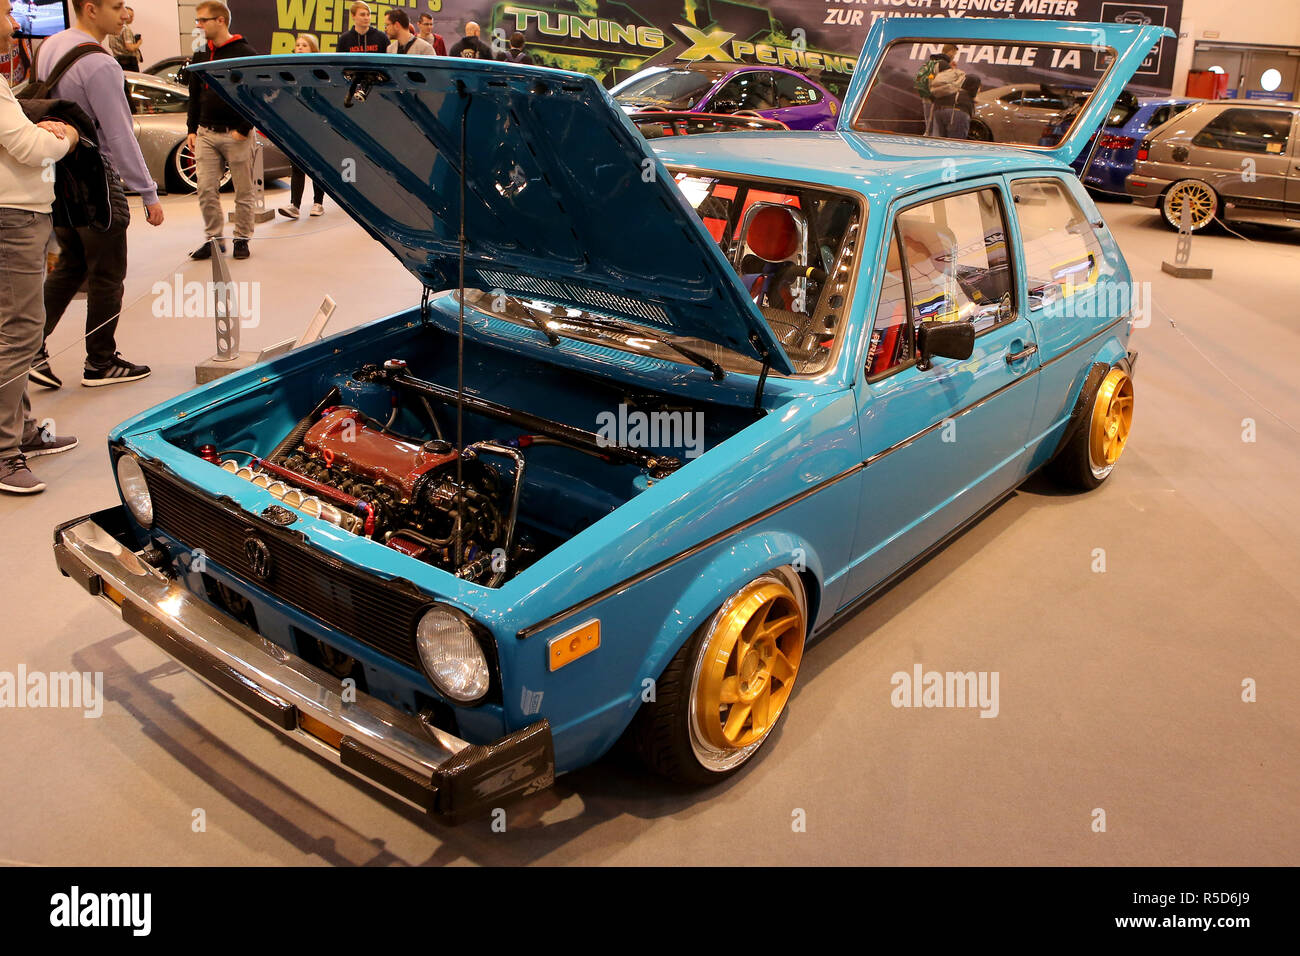 Essen, Germany. 30th Nov, 2018. Volkswagen Golf on display at the Essen  Motor Show Preview Day on November 30, 2018 at the fair grounds in Essen,  Germany. The motor show presents motorcycles,